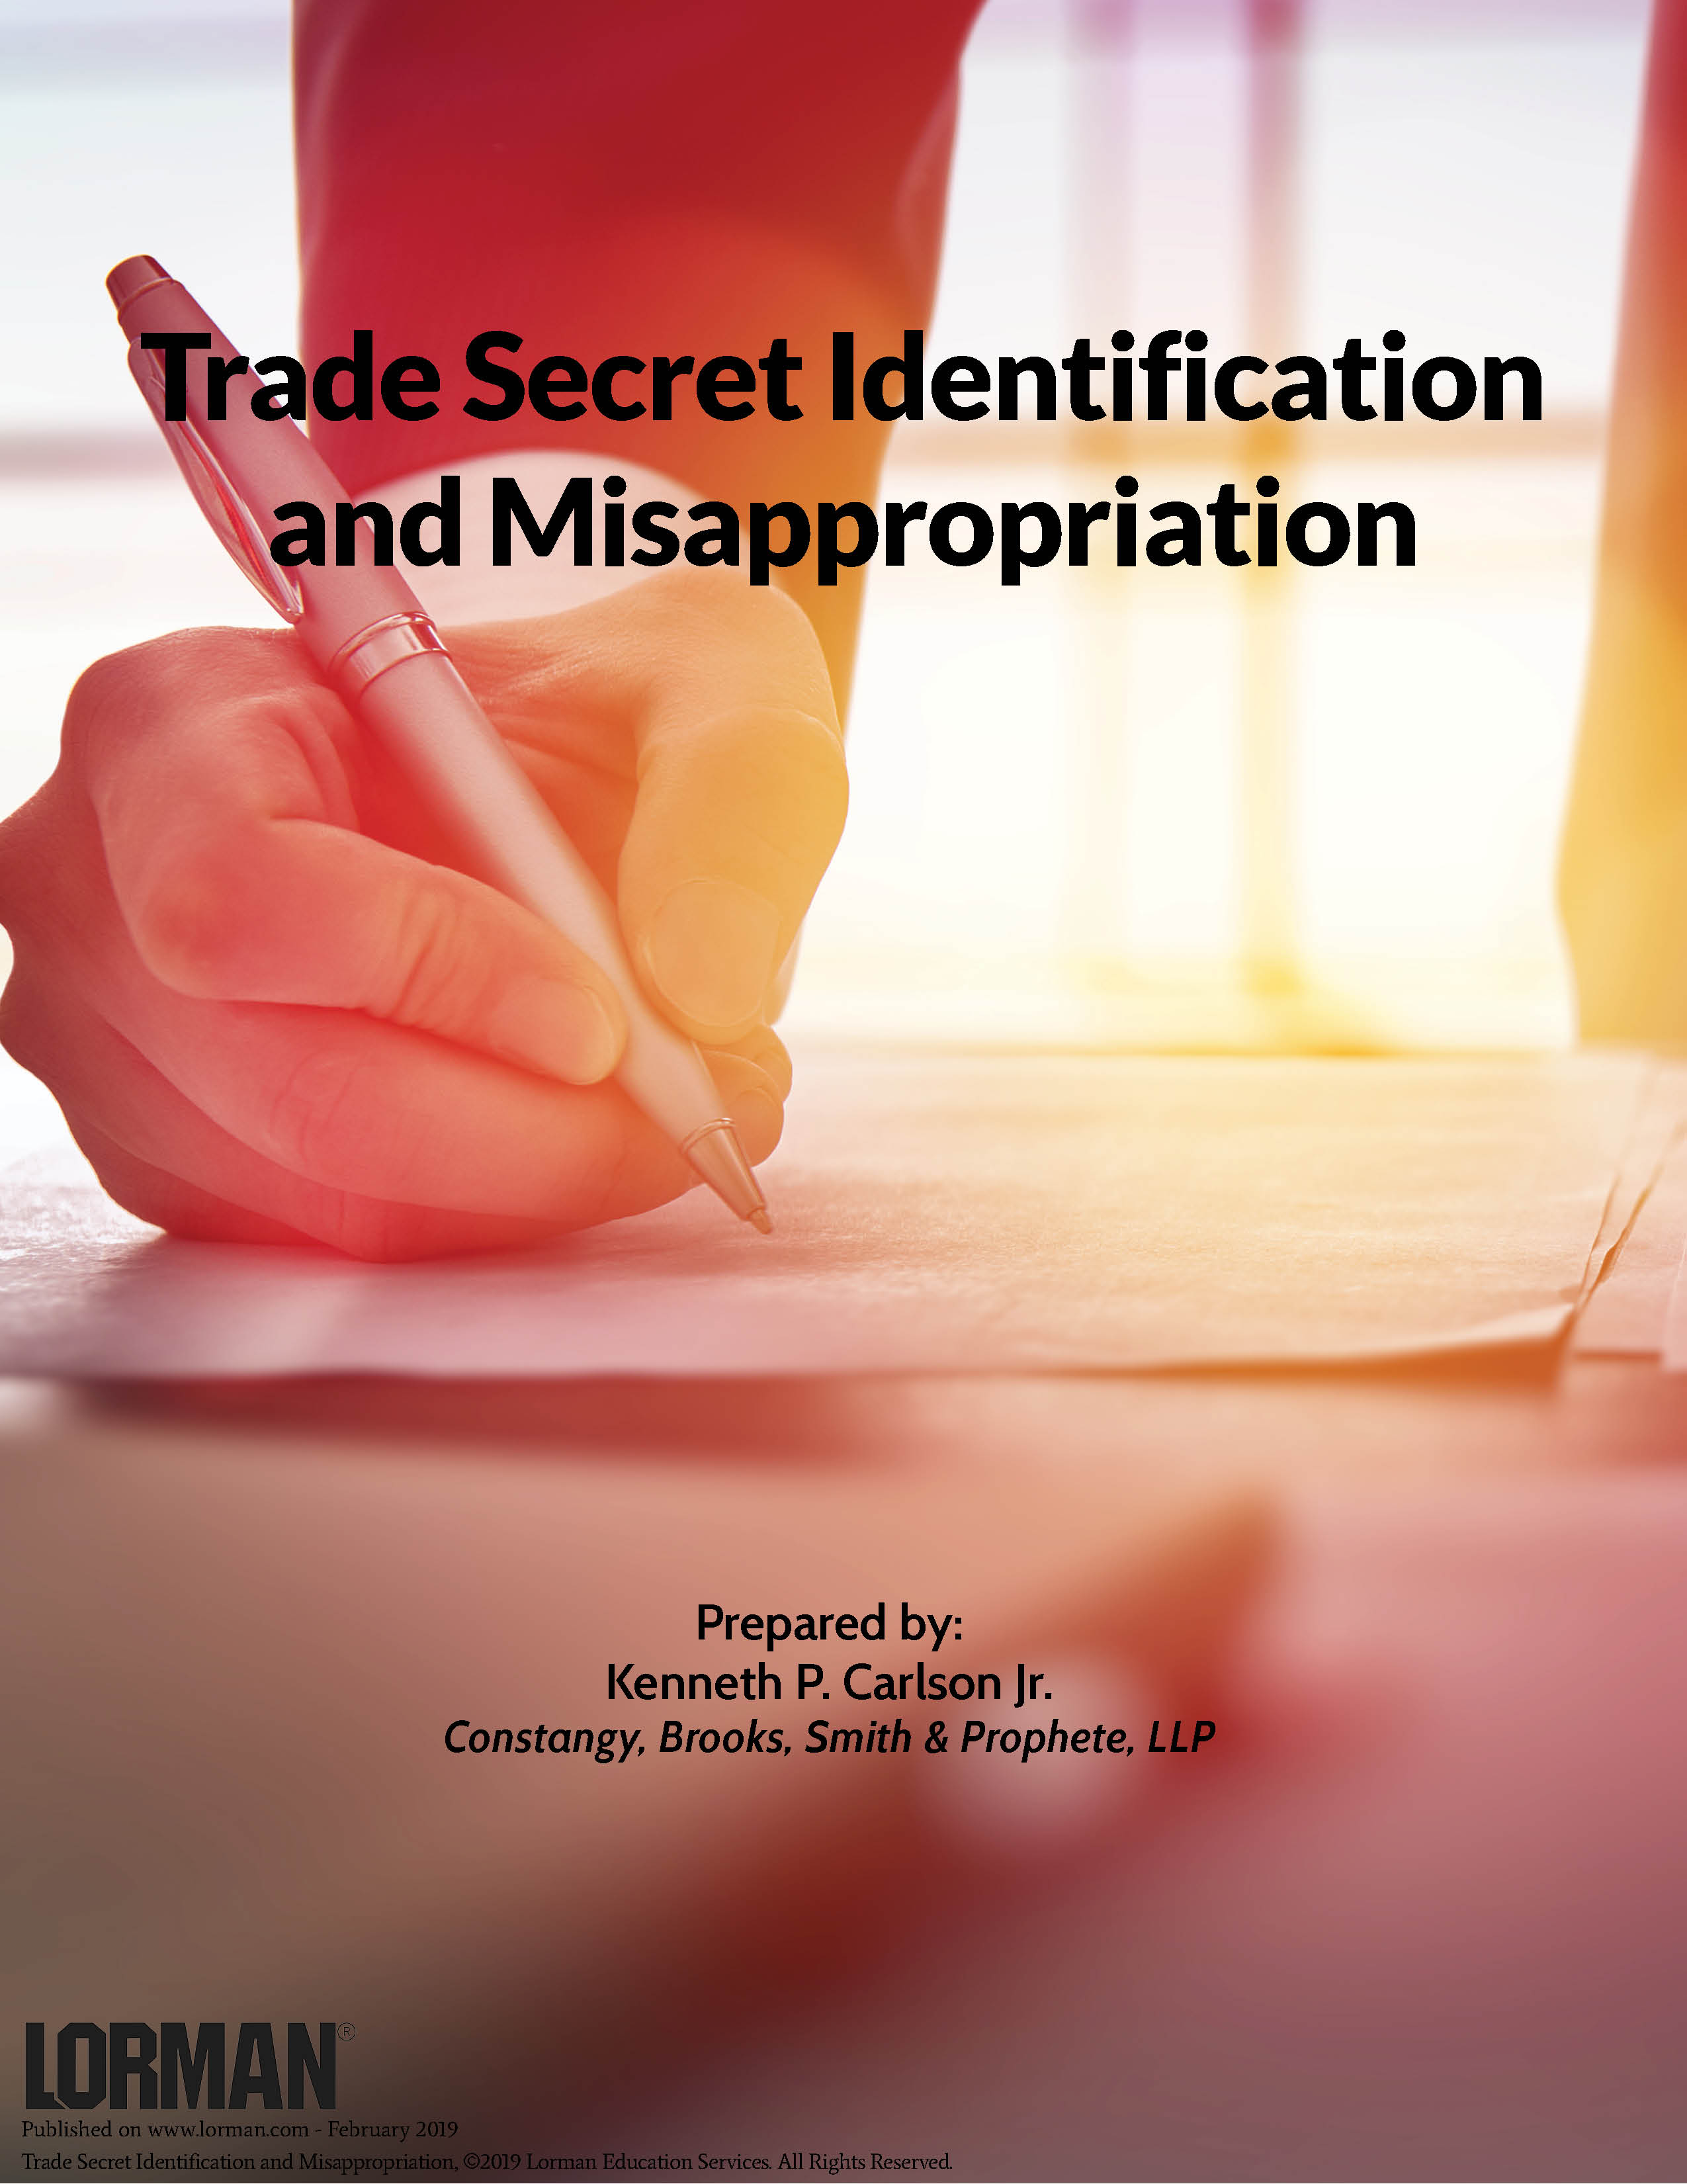 Trade Secret Identification and Misappropriation